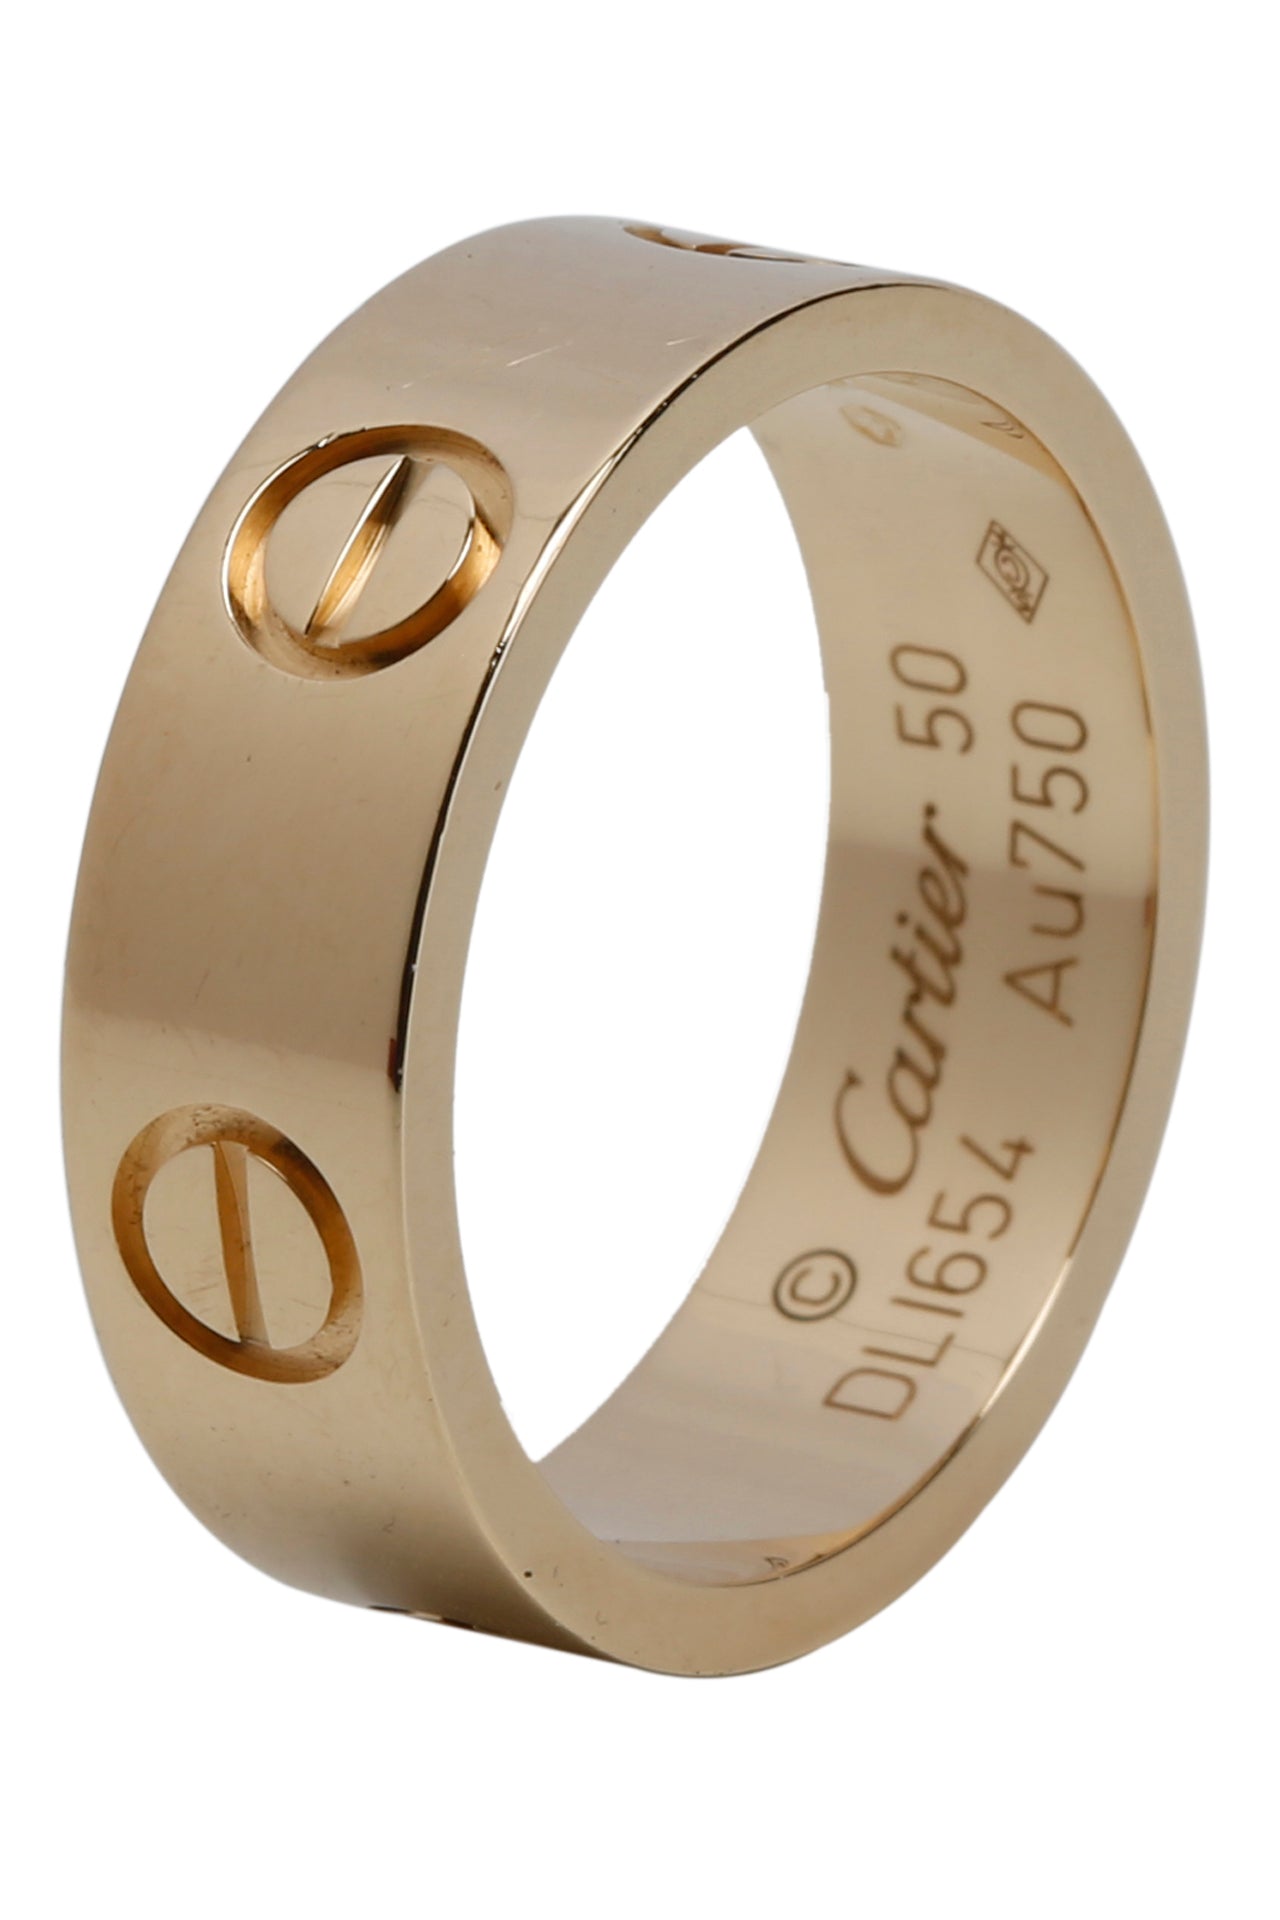 Cartier Yellow Gold Love Ring